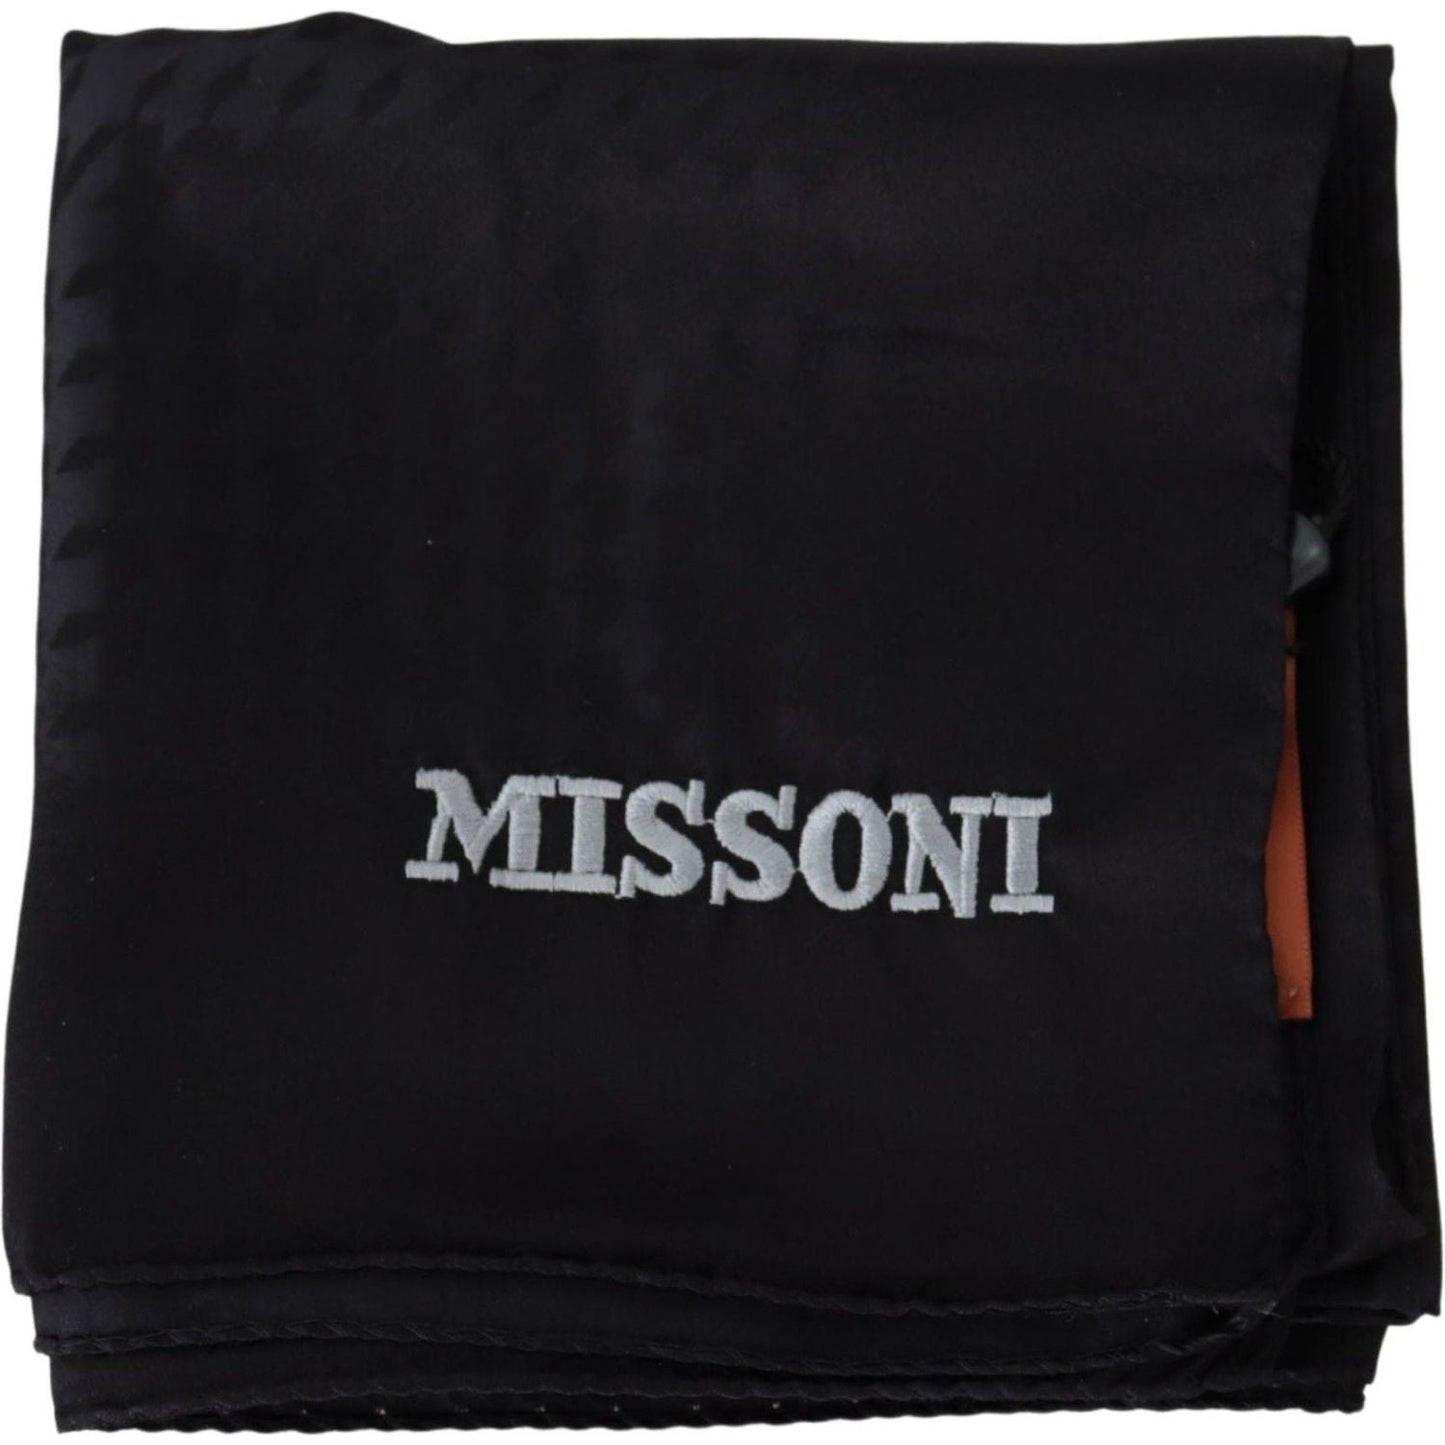 Elegant Black Wool Scarf with Embroidered Logo